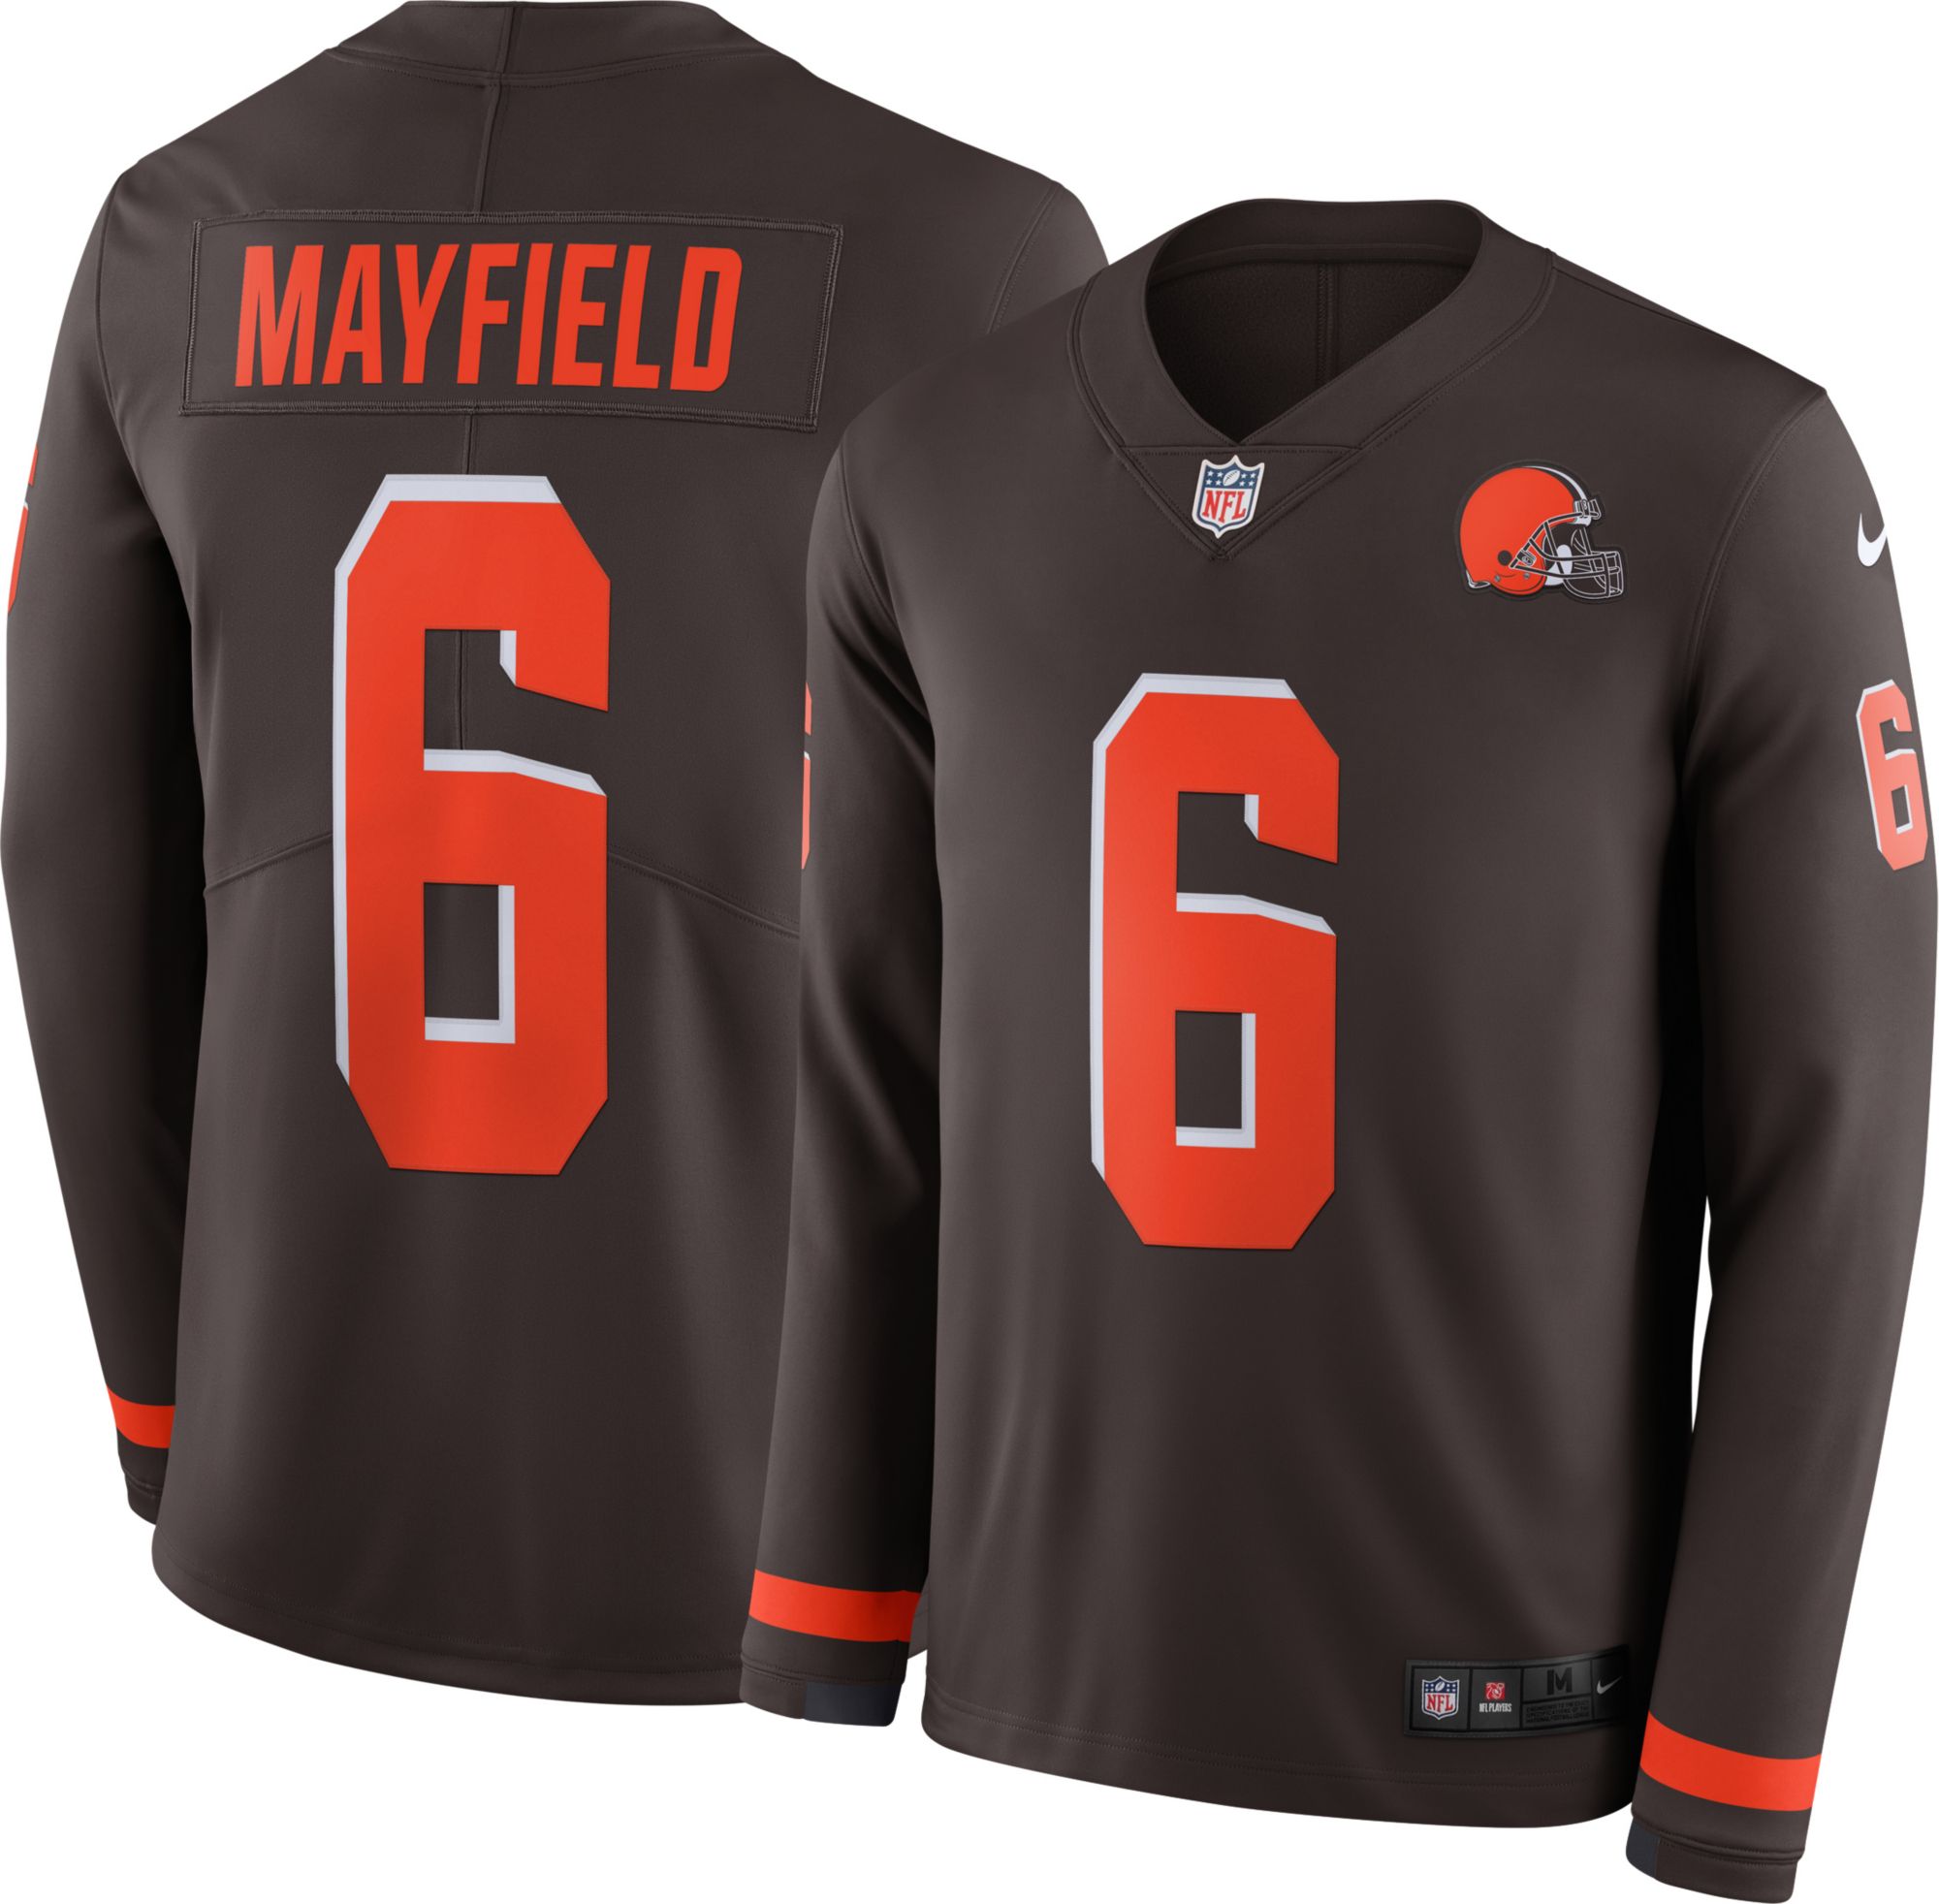 browns long sleeve jersey